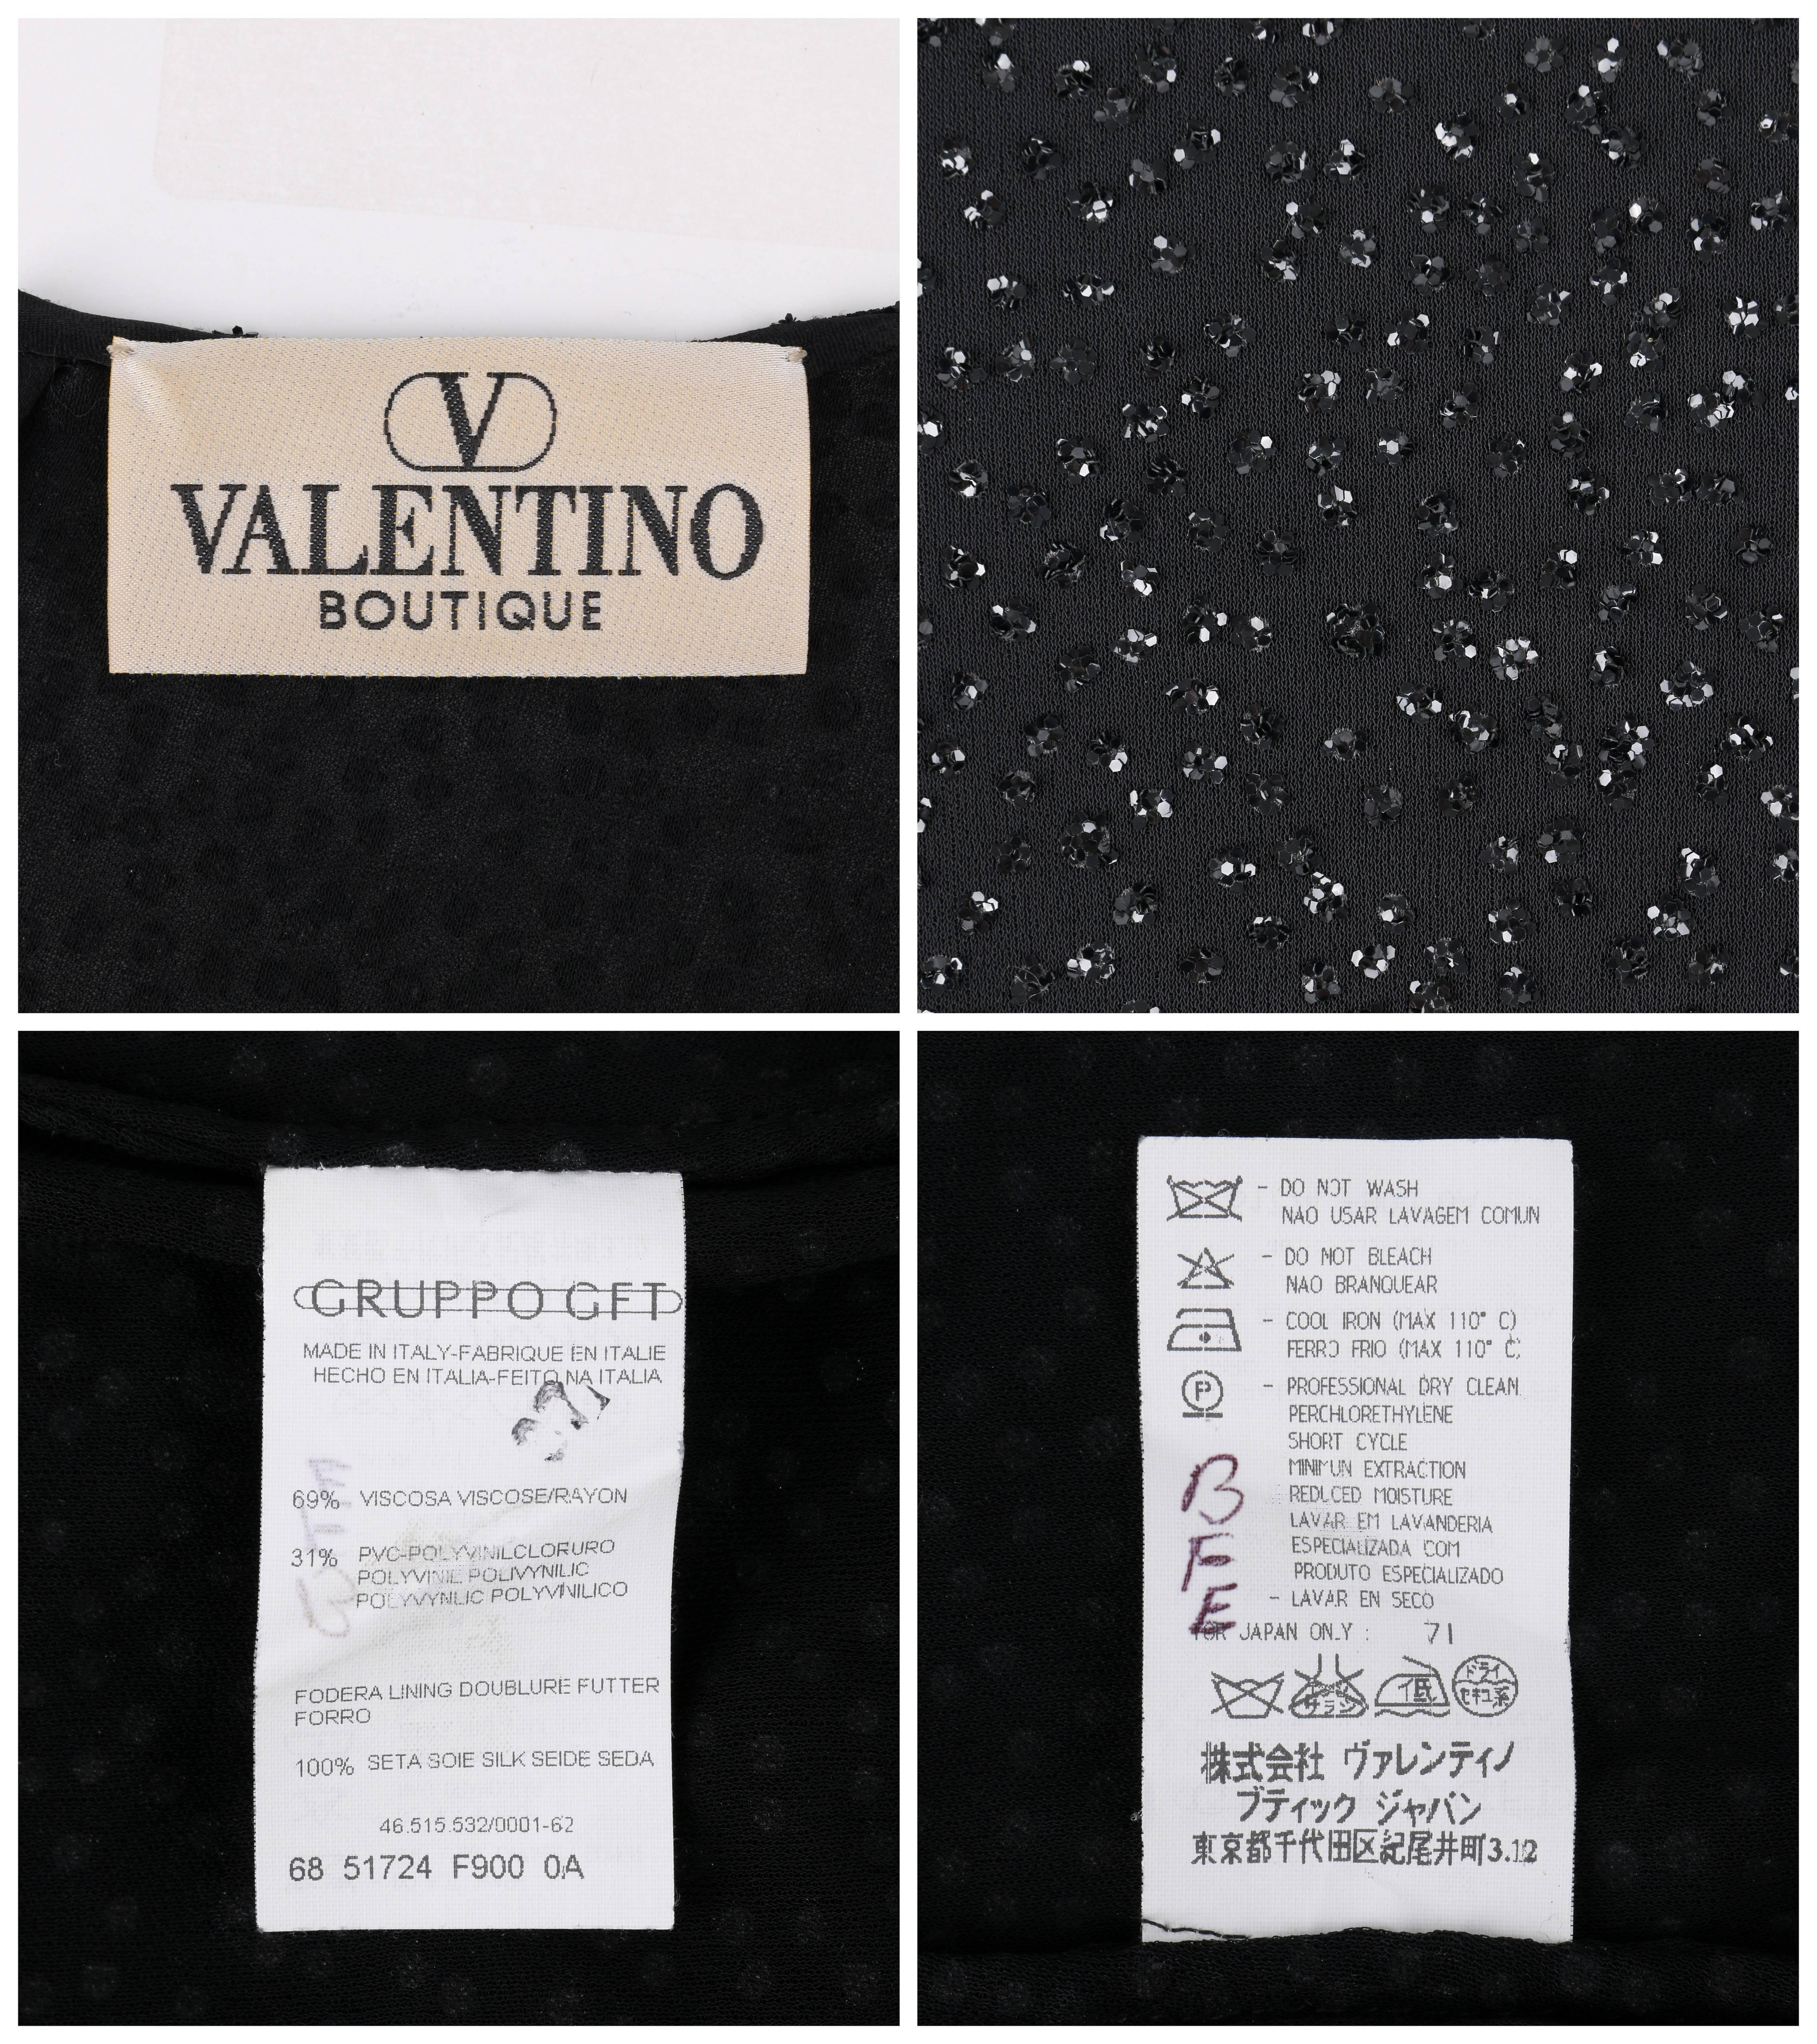 VALENTINO Boutique A/W 2000 Black Metallic Sequin Knit Scoop Neck Top For Sale 2